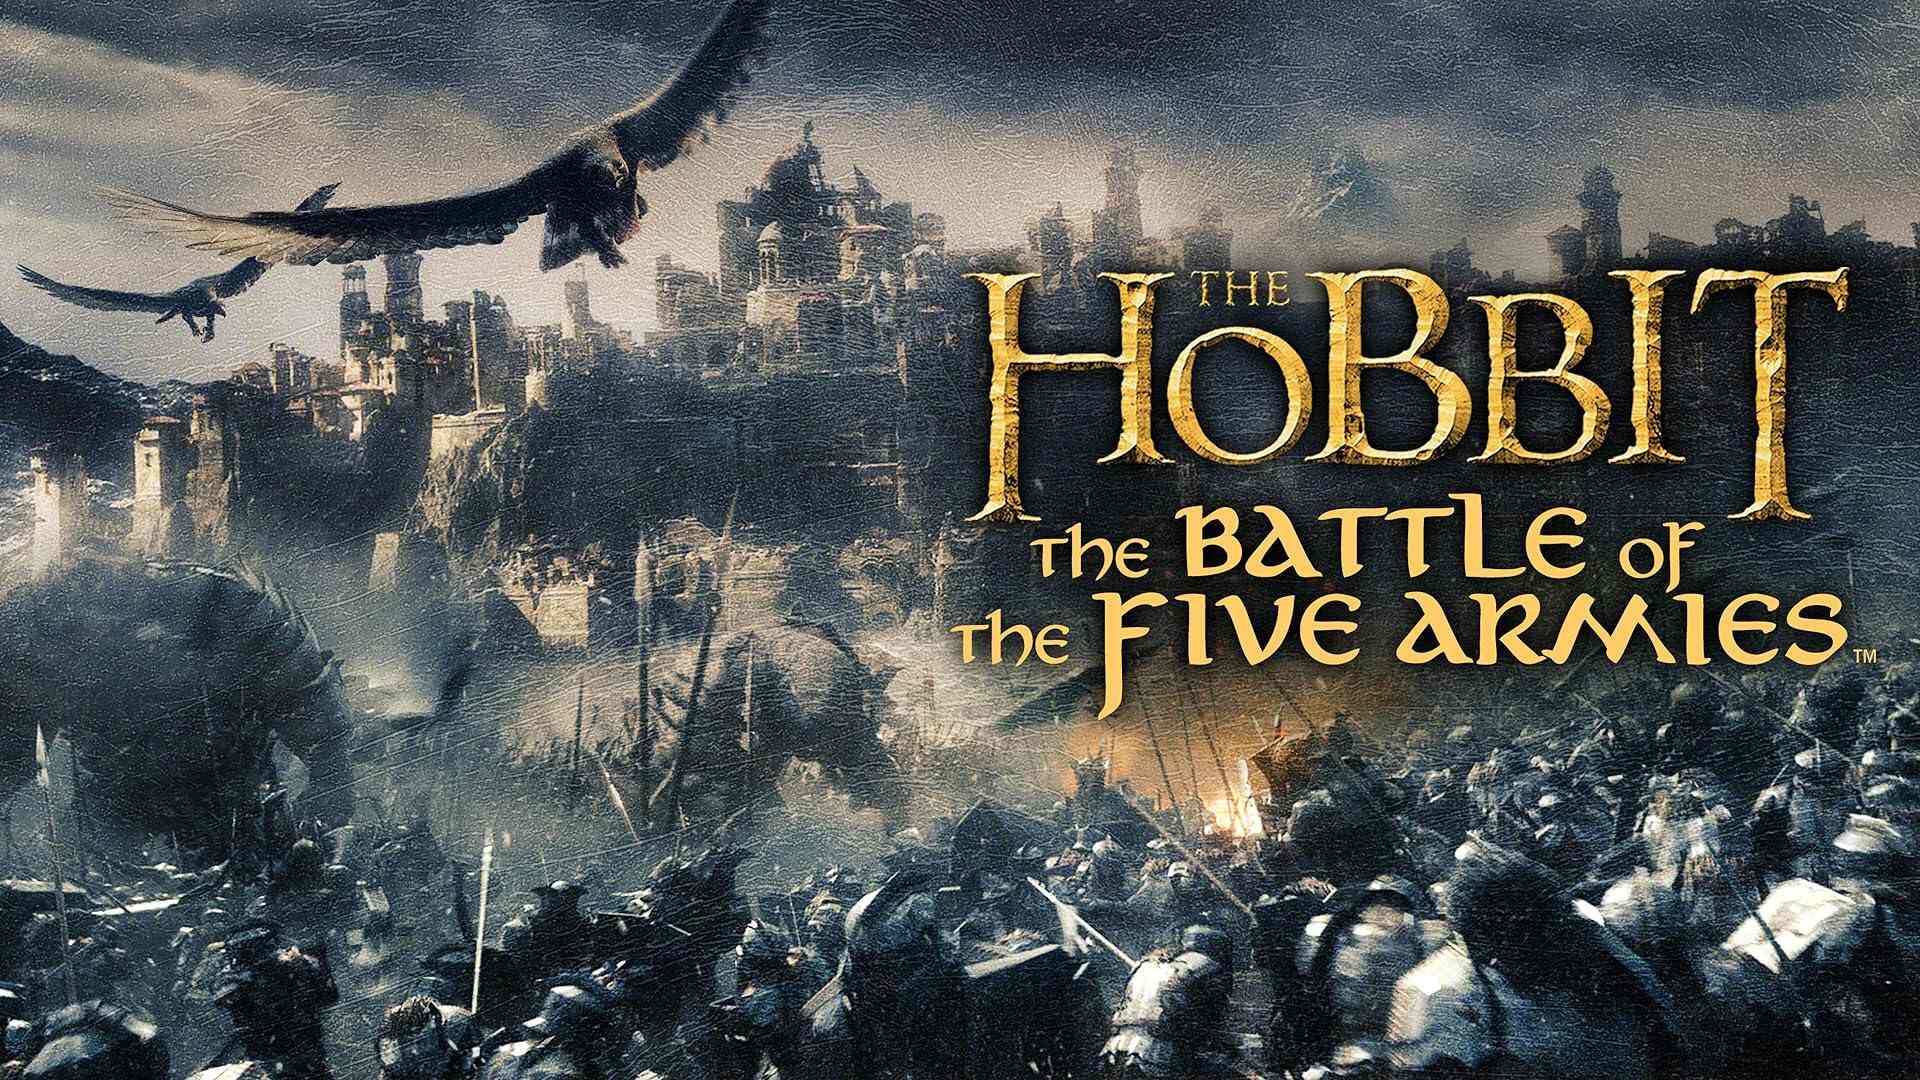 39 Facts about the movie The Hobbit: An Unexpected Journey 